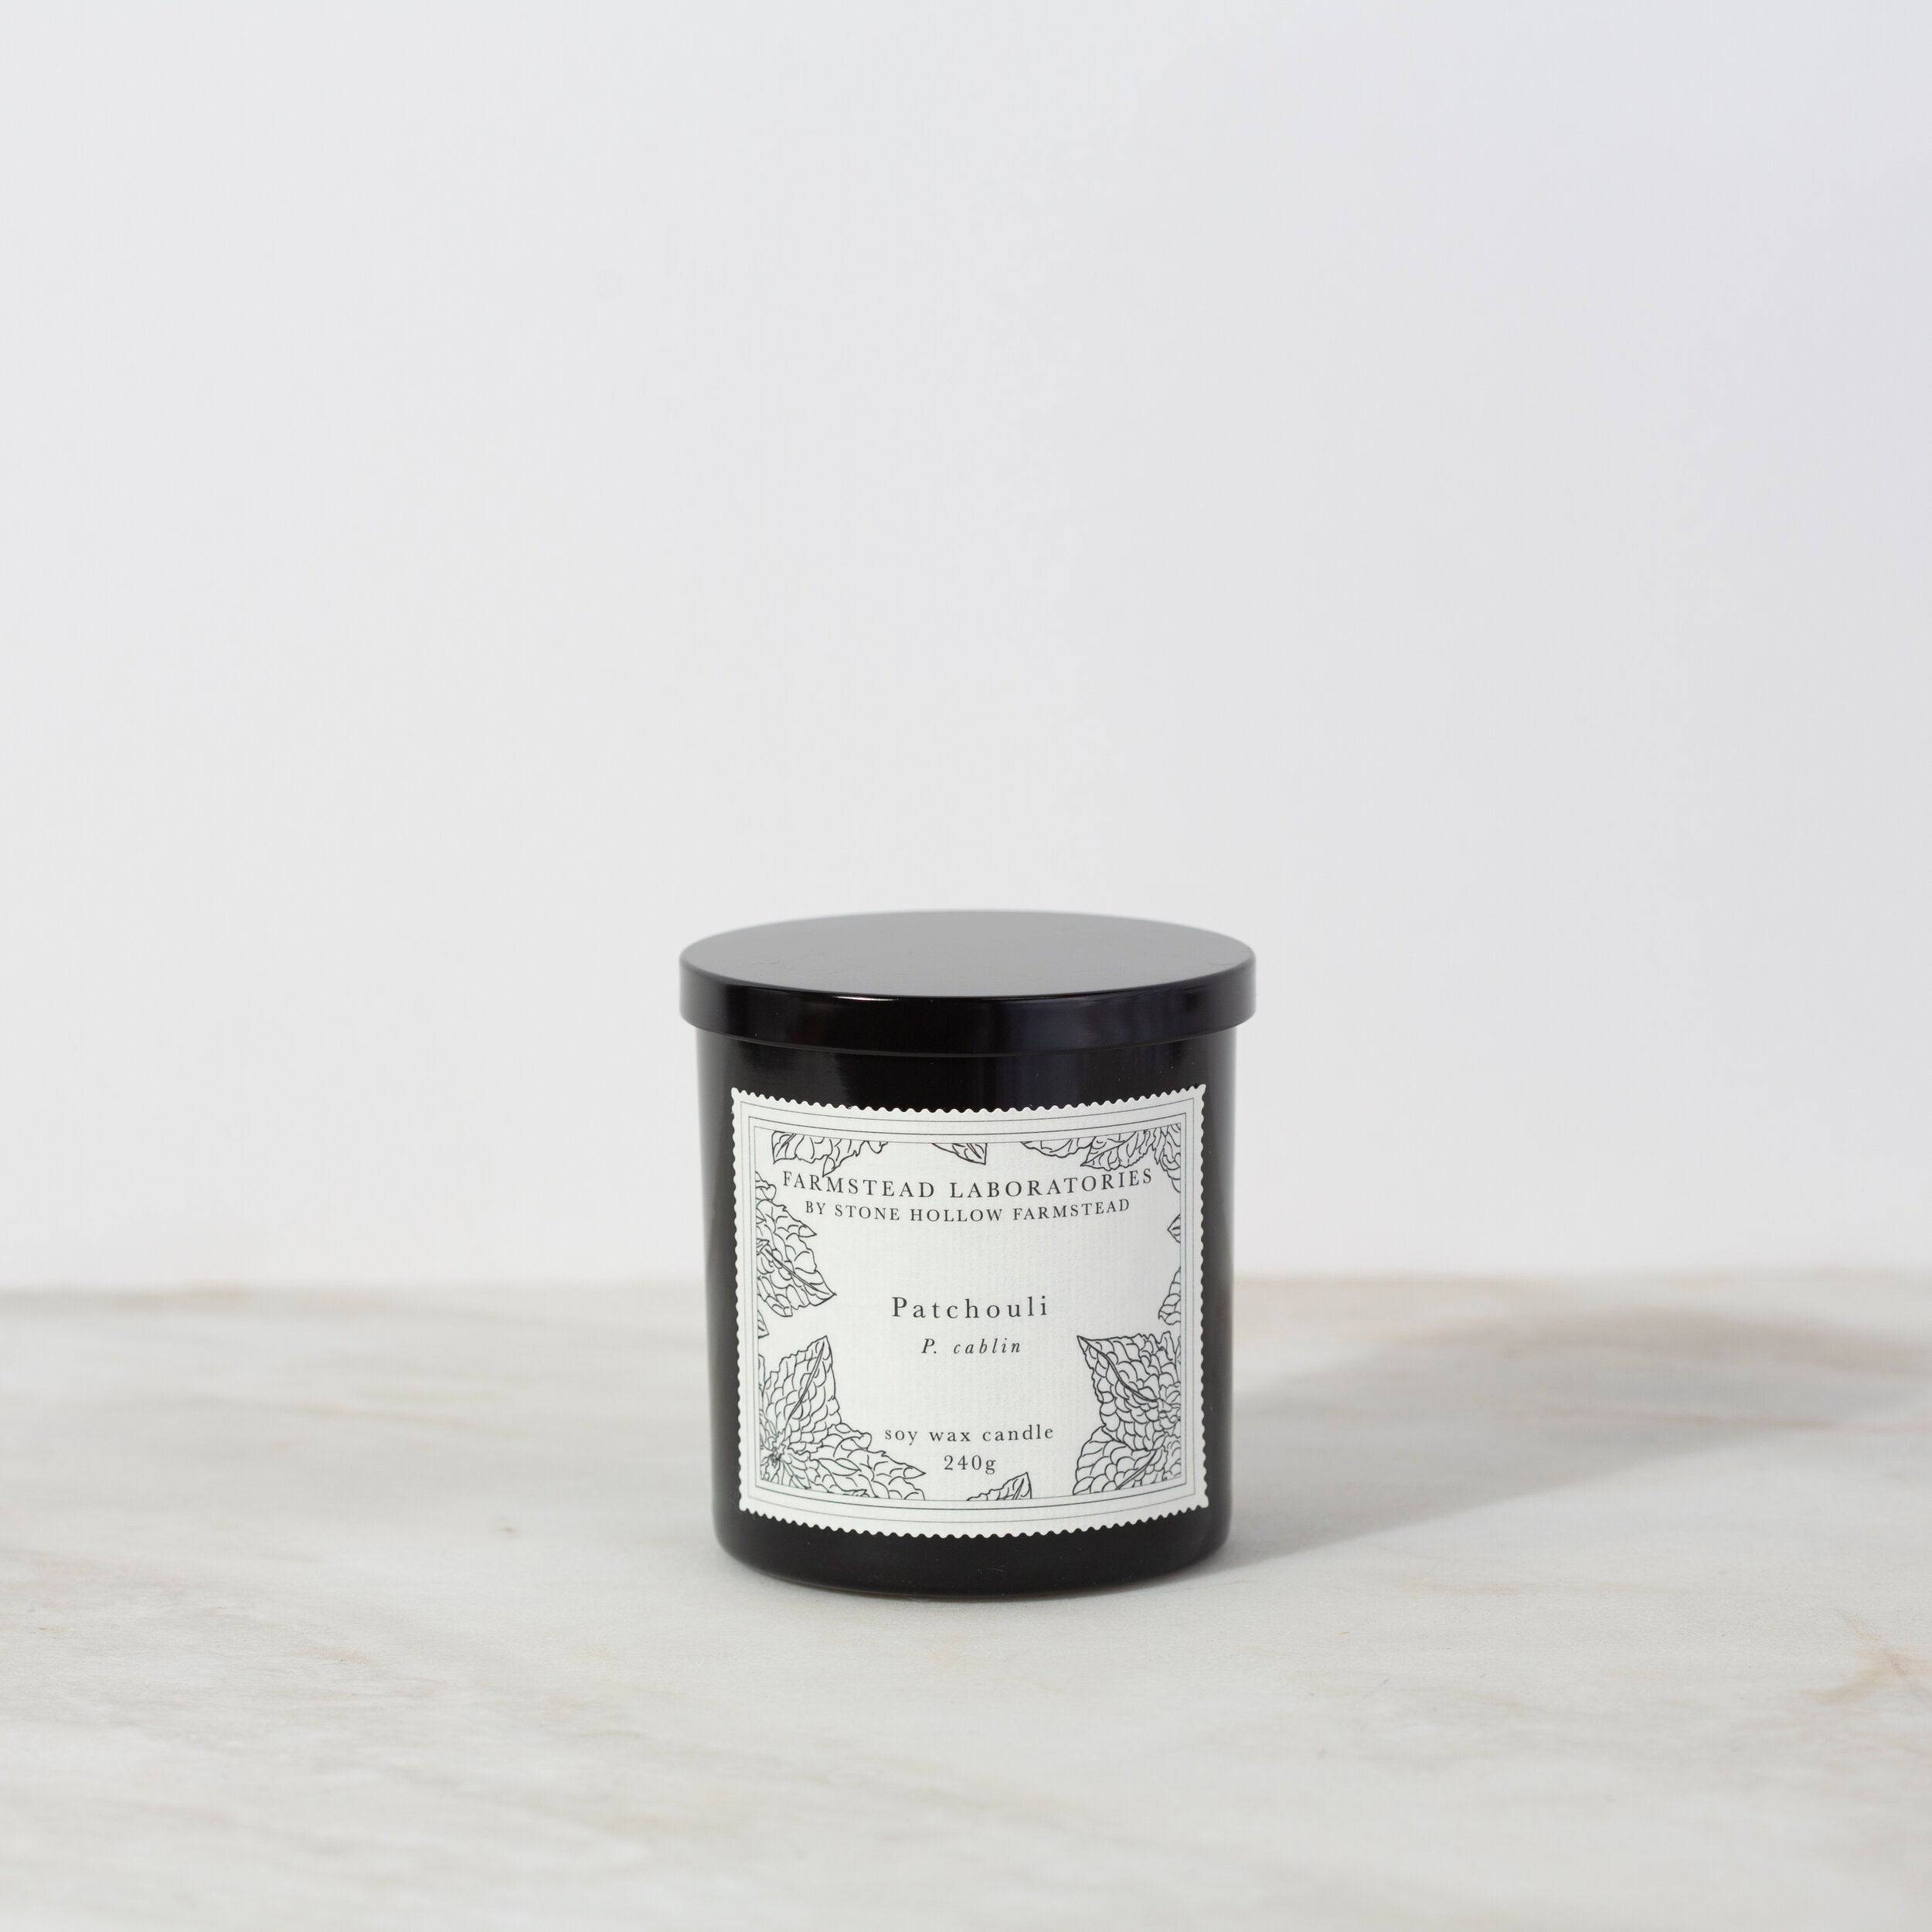 Patchouli Amber - Handmade Soy Candle 8 oz – Sand & Sea by Ashley